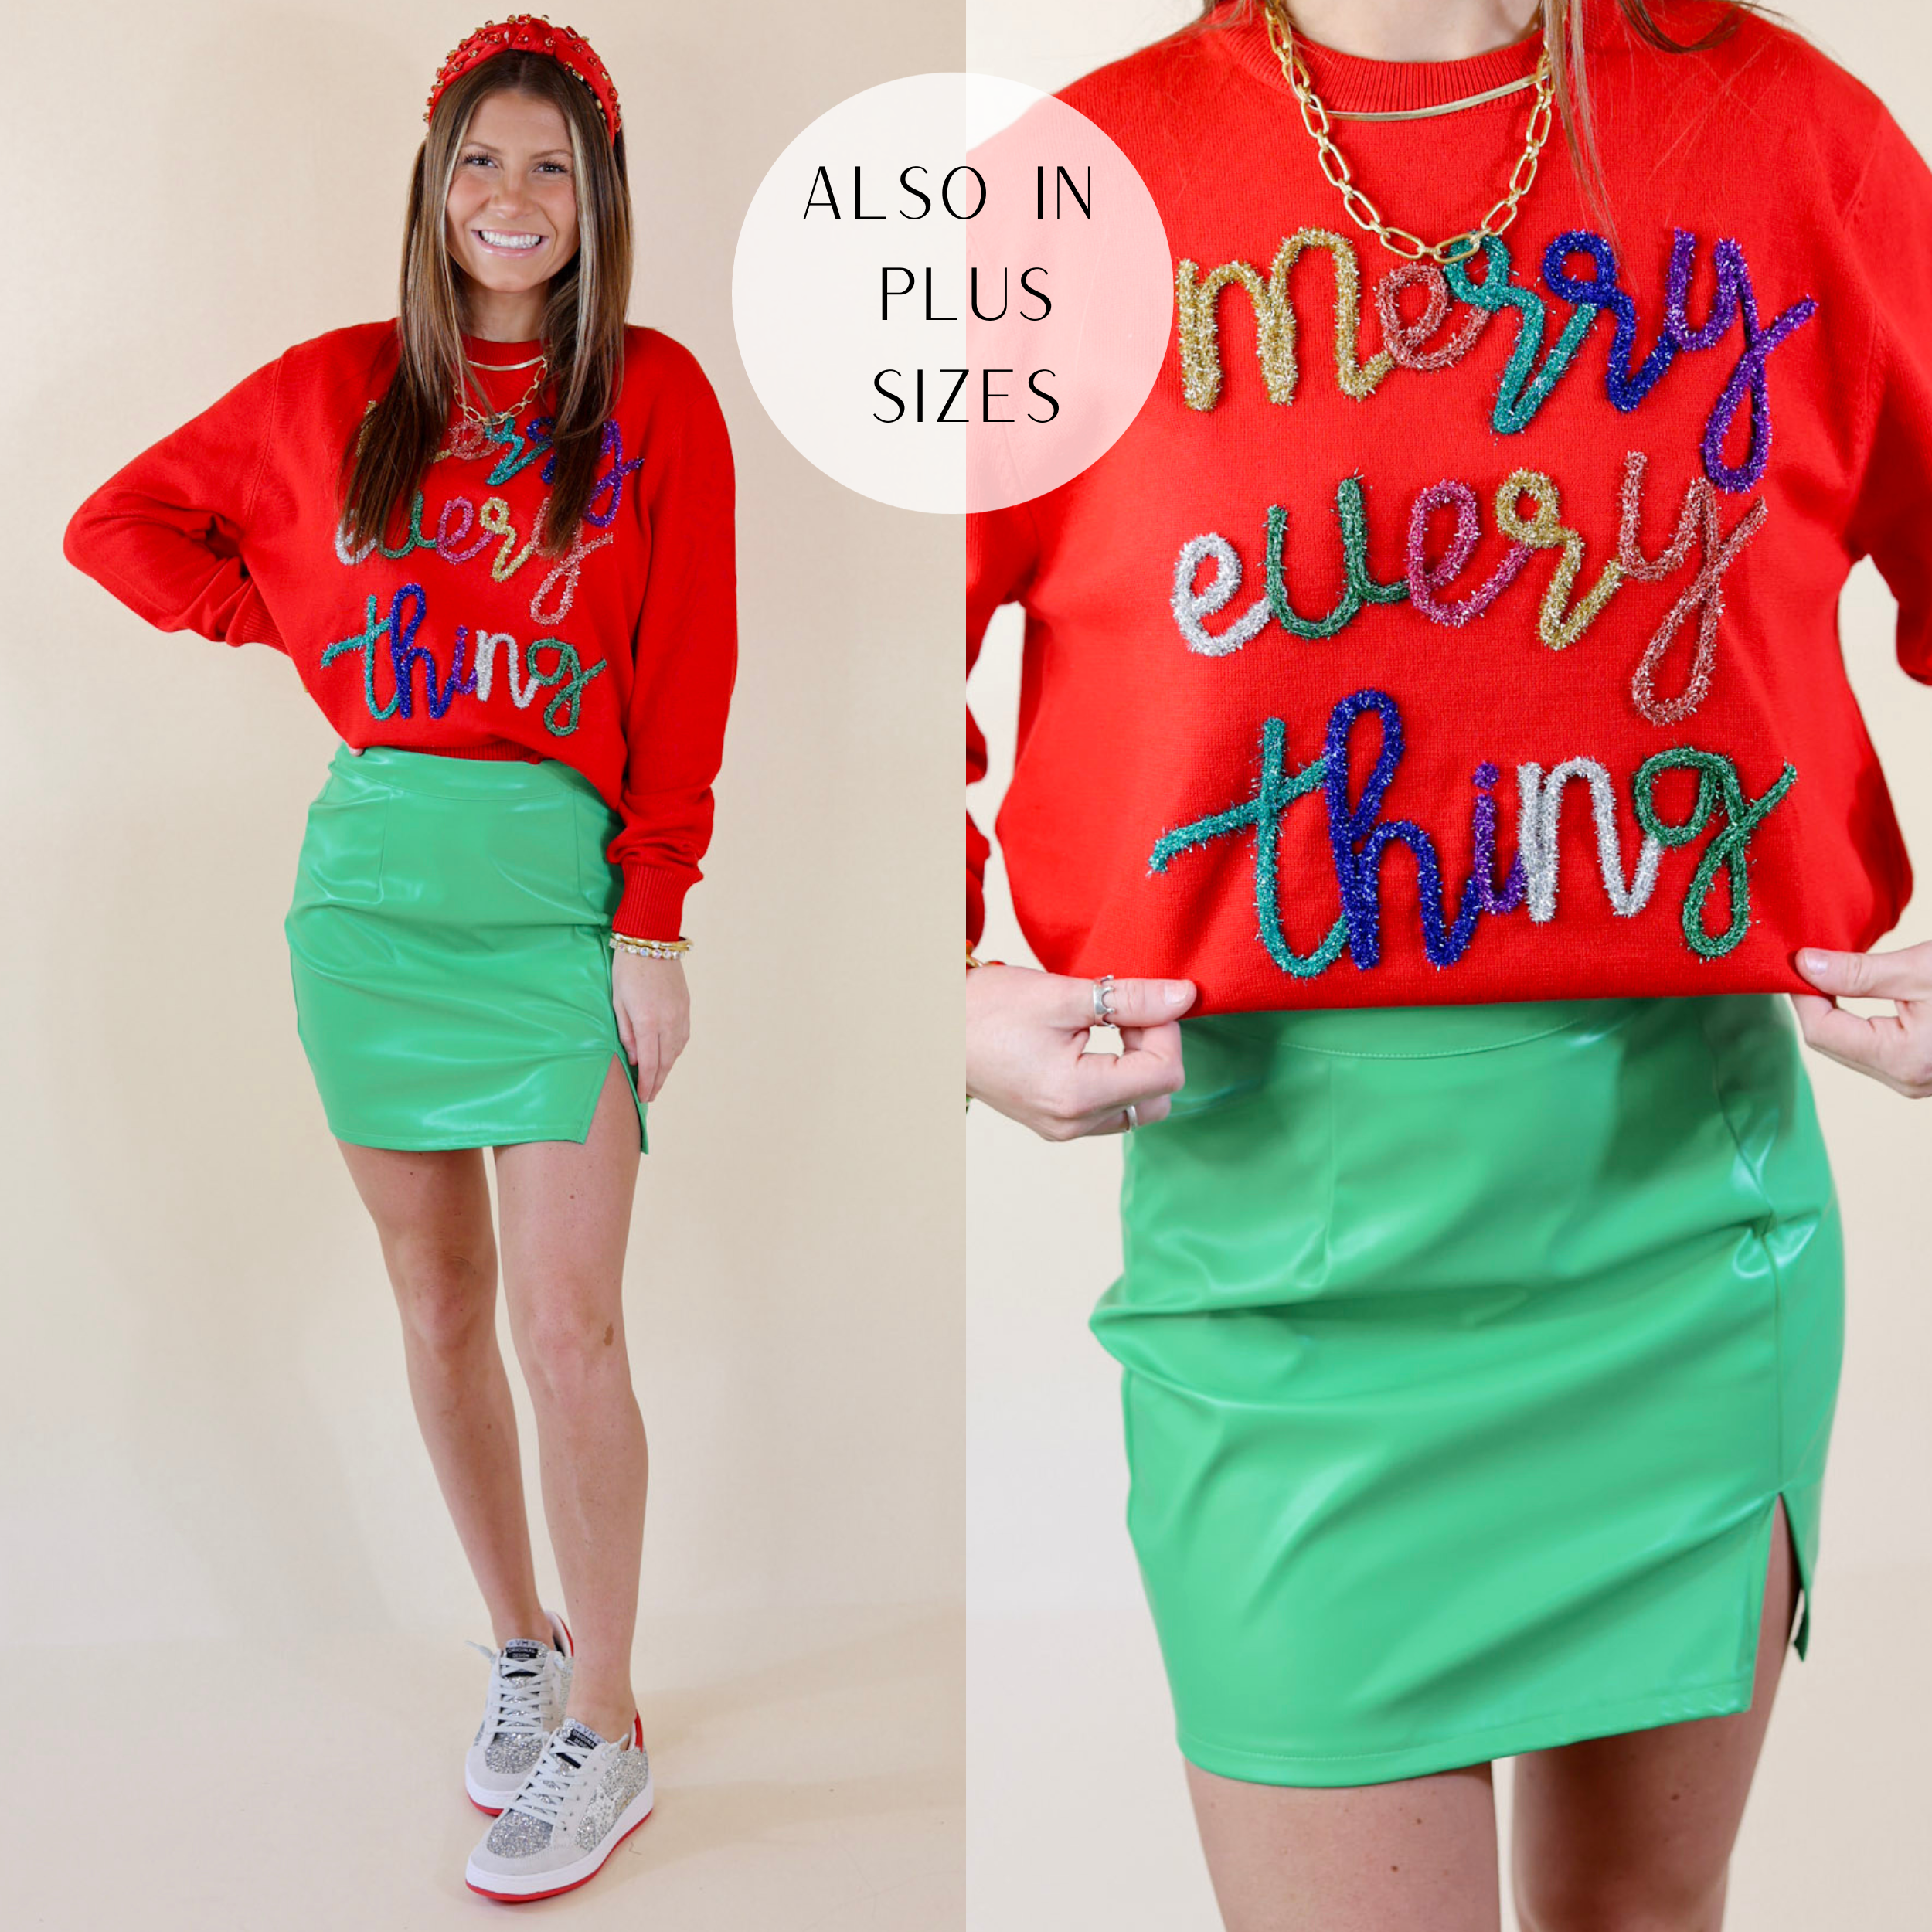 Model is wearing a red sweater with tinsel that says "Merry Everything". Model has this sweater paired with a green skirt, a red headband, and gold jewelry.